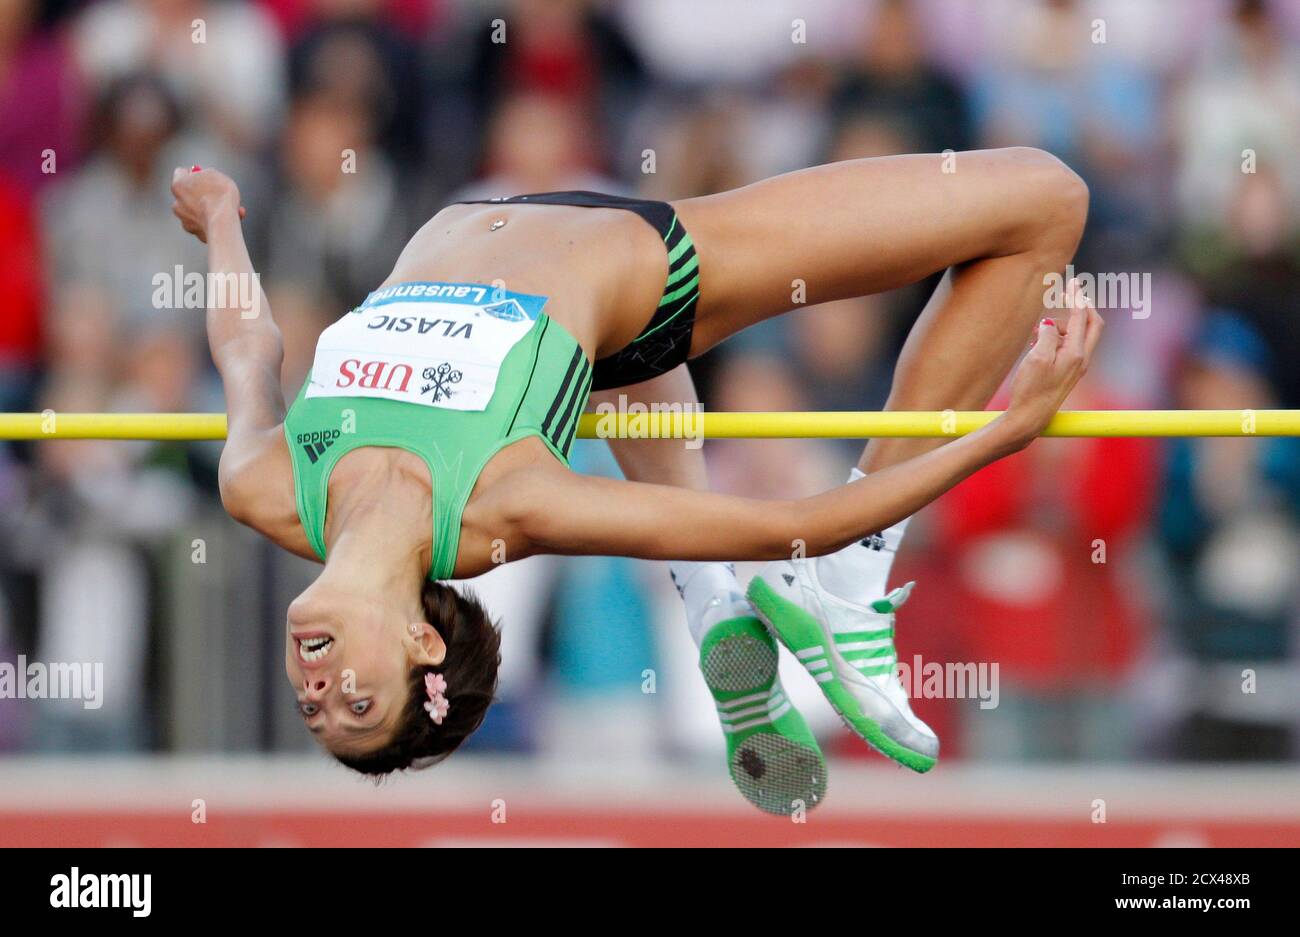 Blanka Vlasic from Croatia competes in the women's high jump event at the  Lausanne Diamond League (Athletissima) athletics meeting at the Stade de la  Pontaise in Lausanne June 30, 2011. REUTERS/Valentin Flauraud (